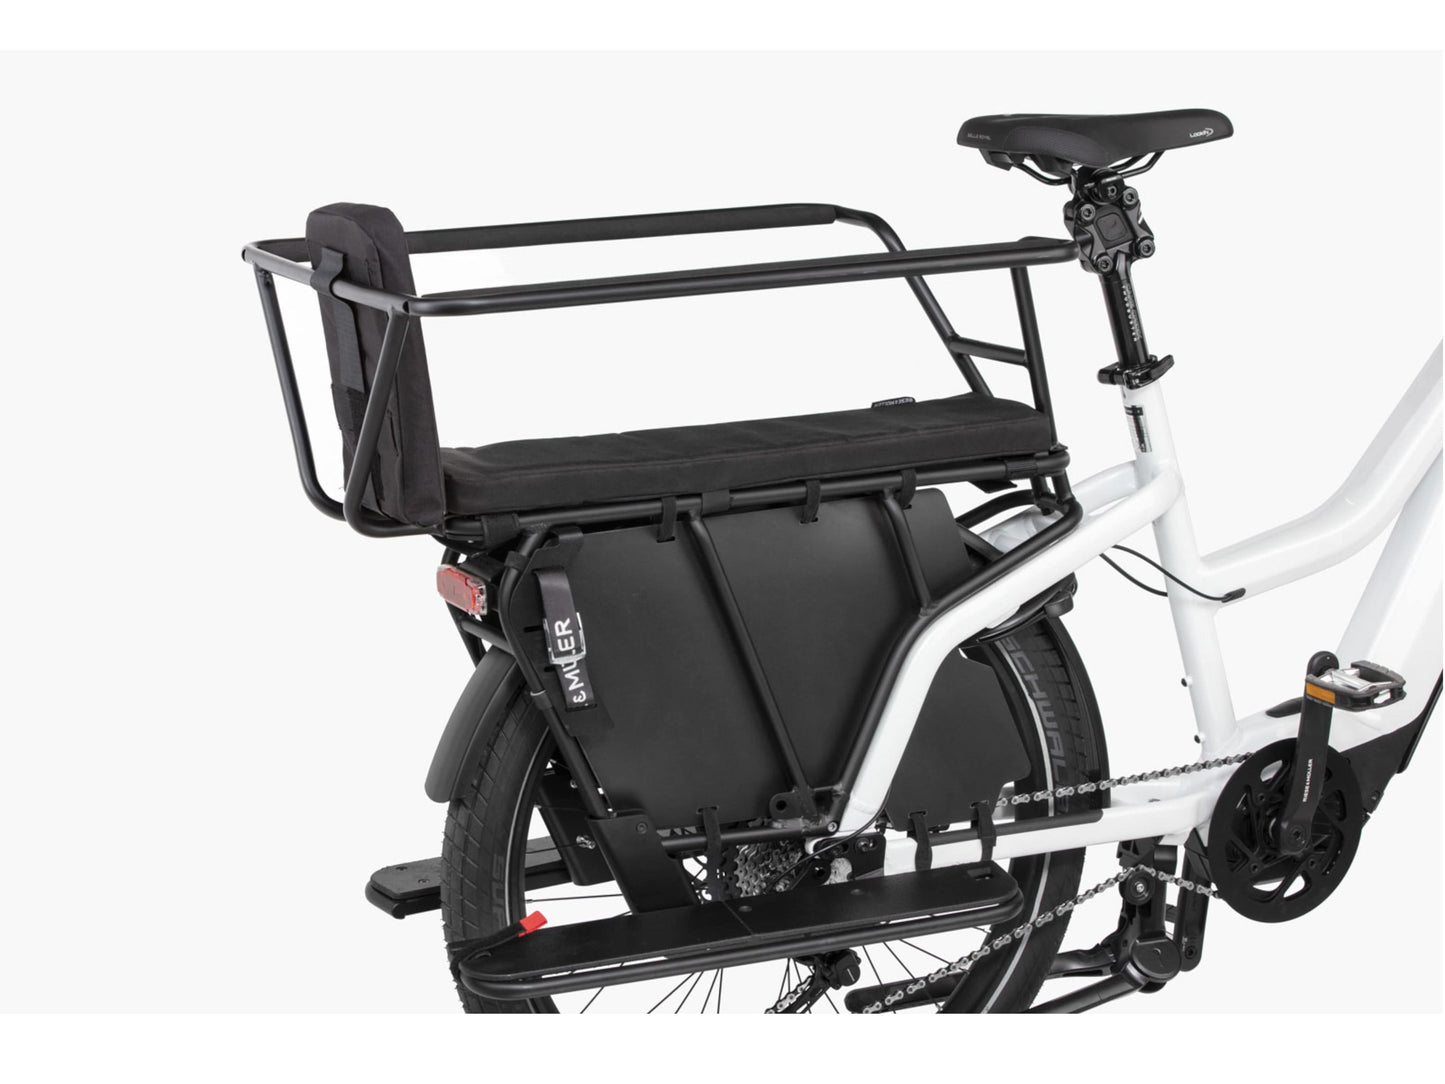 Riese and Muller Multicharger Mixte GT Vario 750 emtb hardtail closeup rear carrier passenger safety kit option